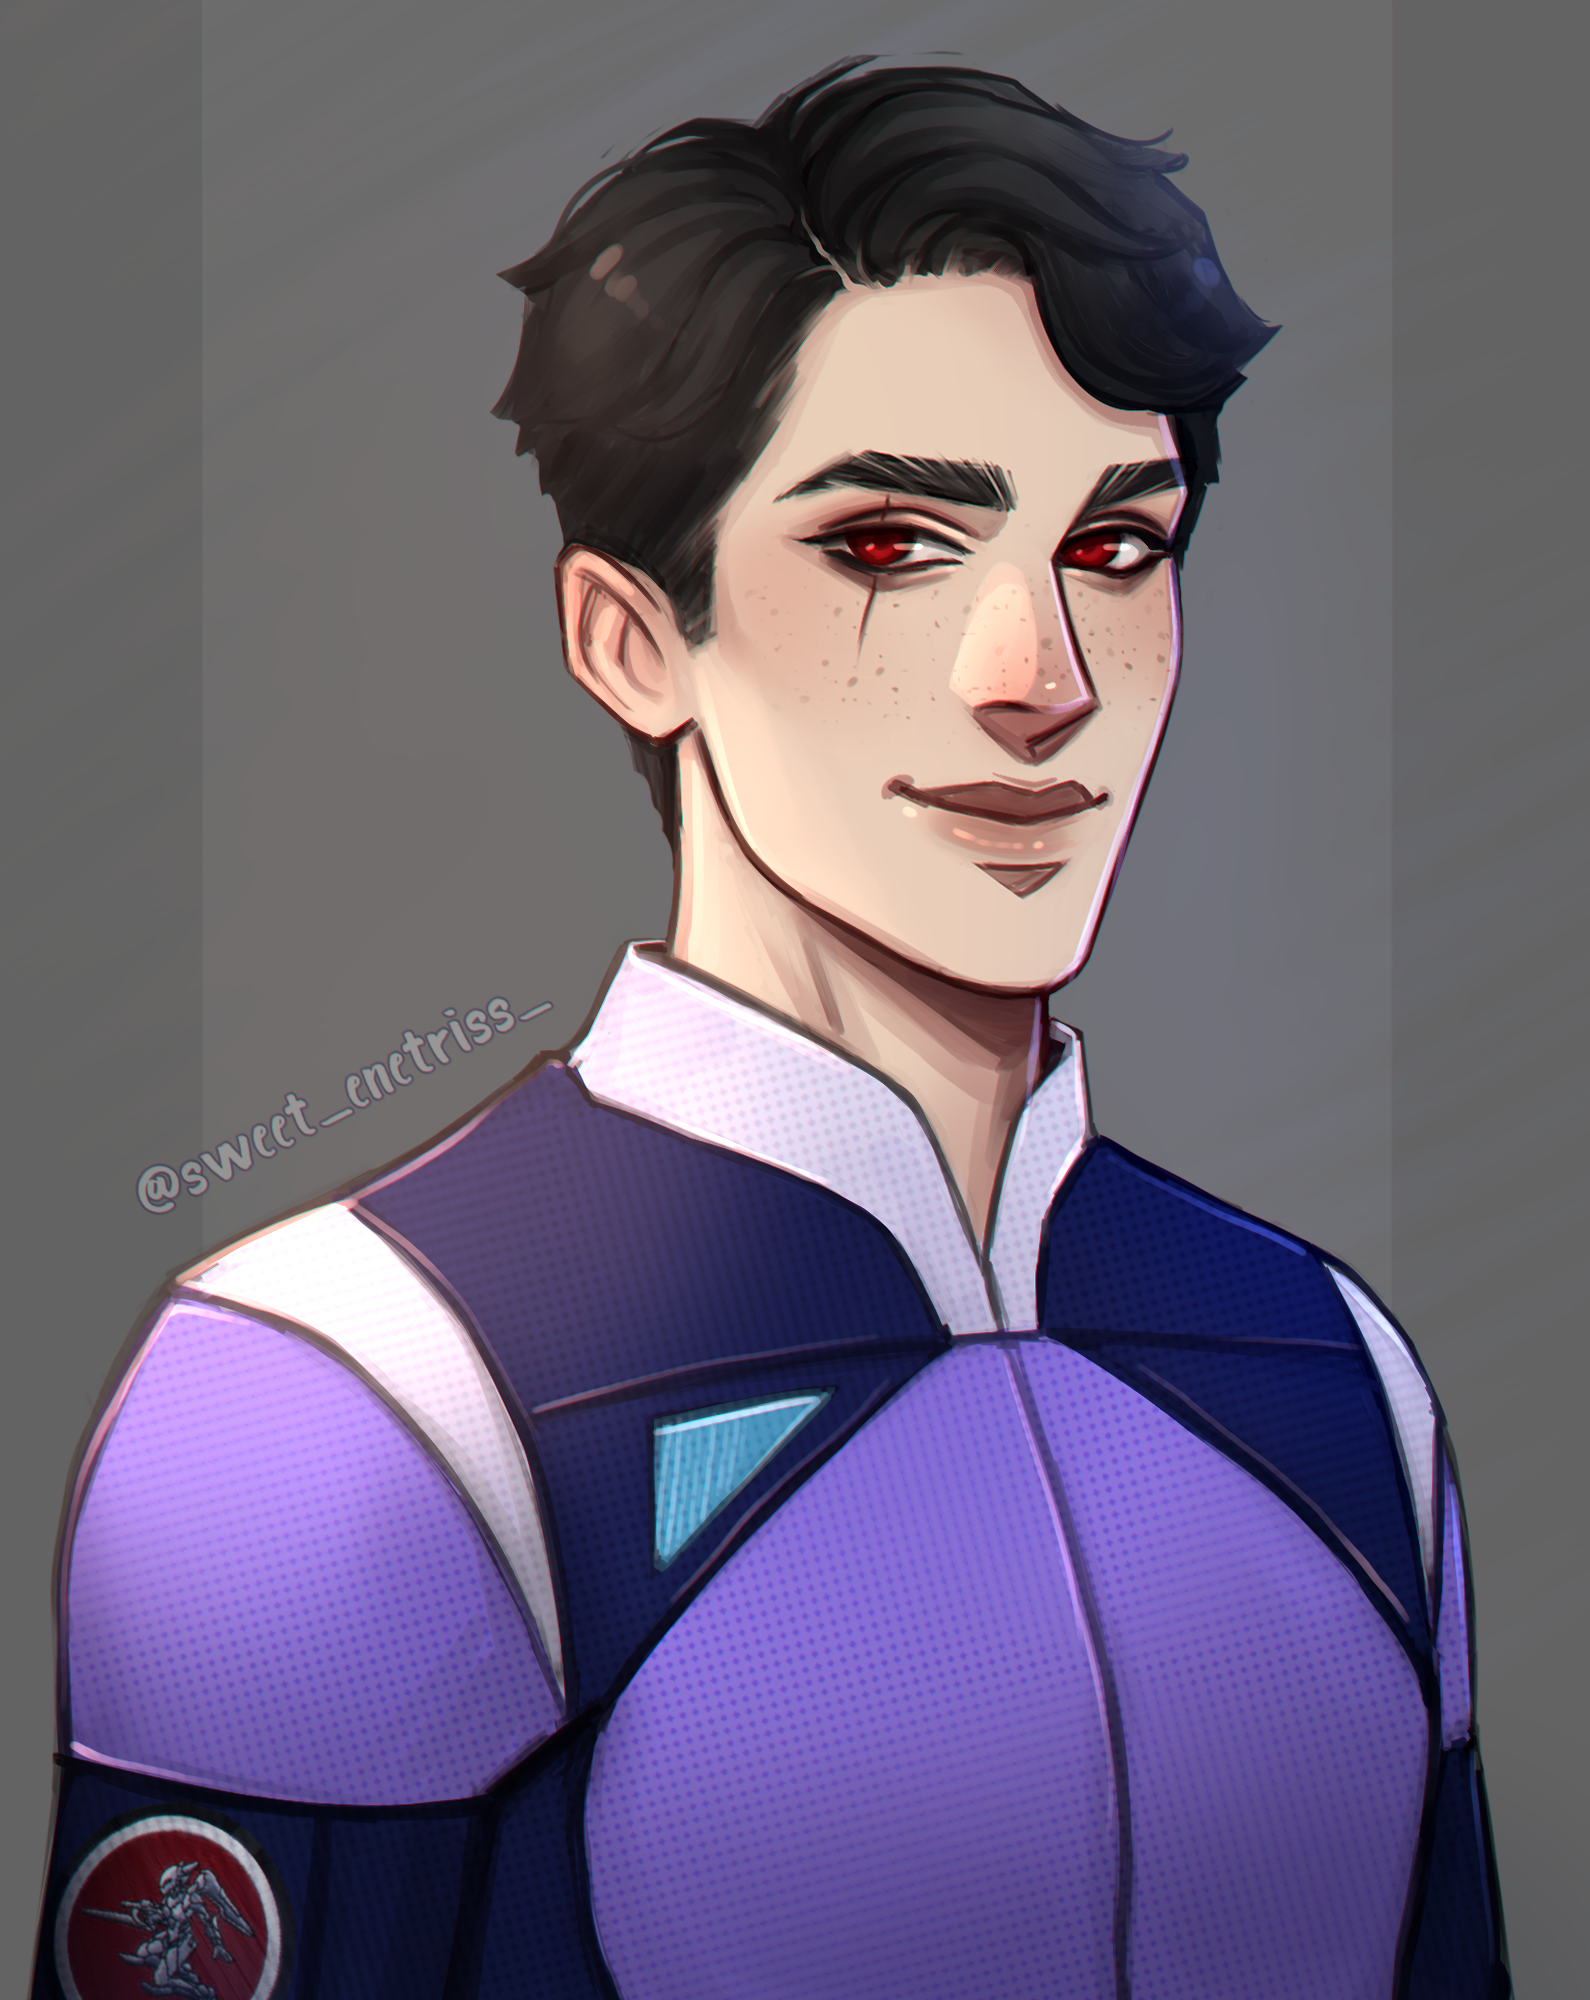 2021 Yoshiro Tanaka by Sweet Enetriss commissioned by Wes